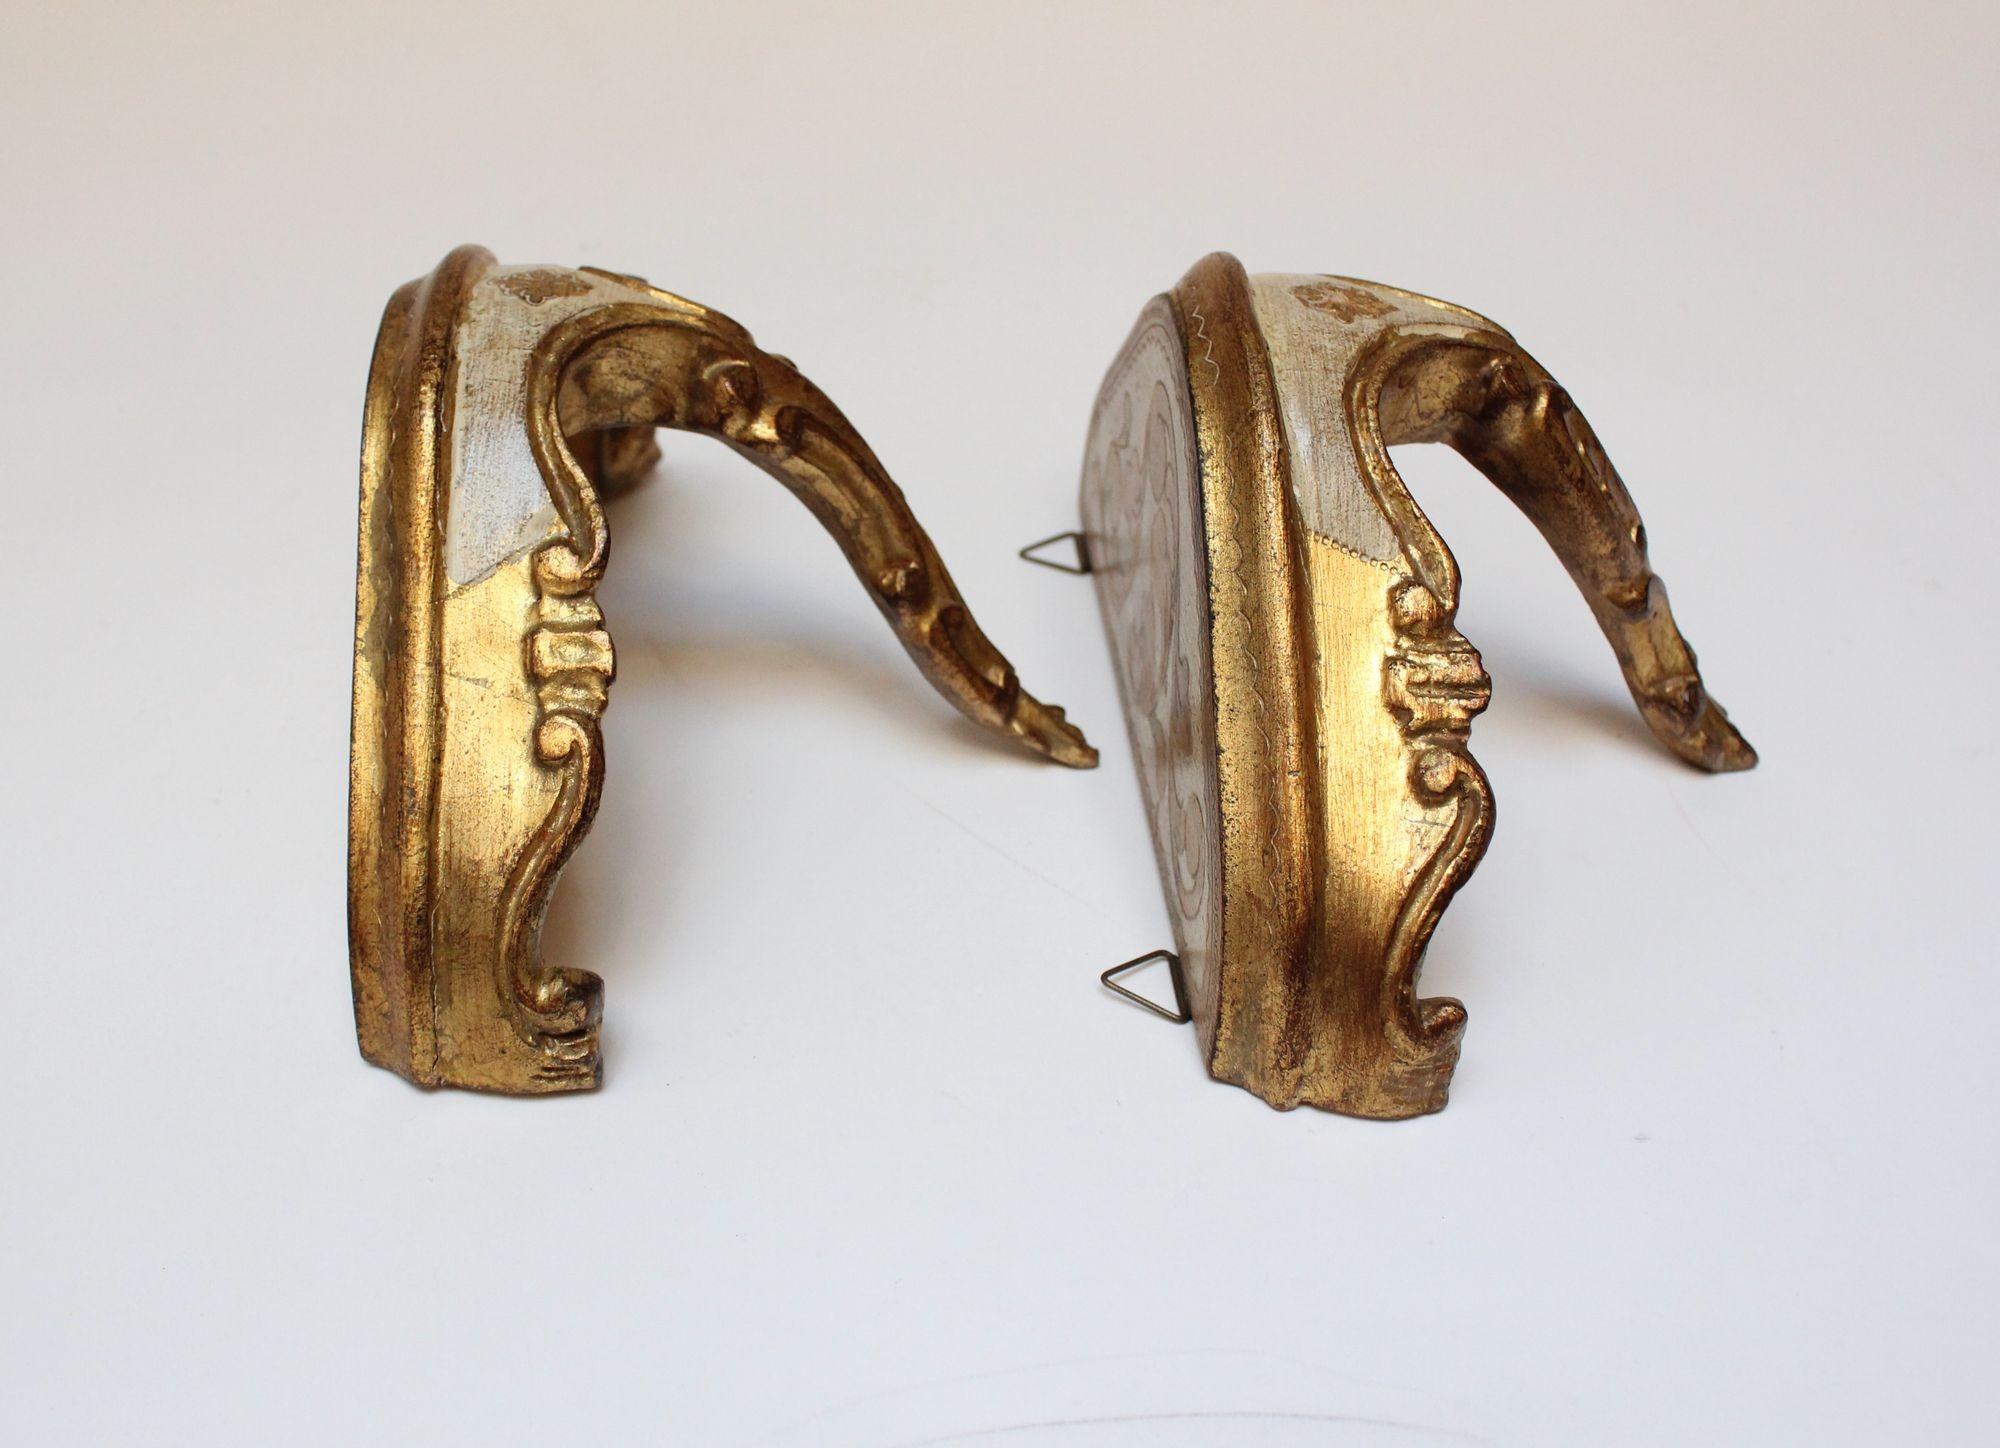 Pair of Vintage Florentine Giltwood Wall Brackets/Shelves with Rocaille Flourish In Good Condition For Sale In Brooklyn, NY